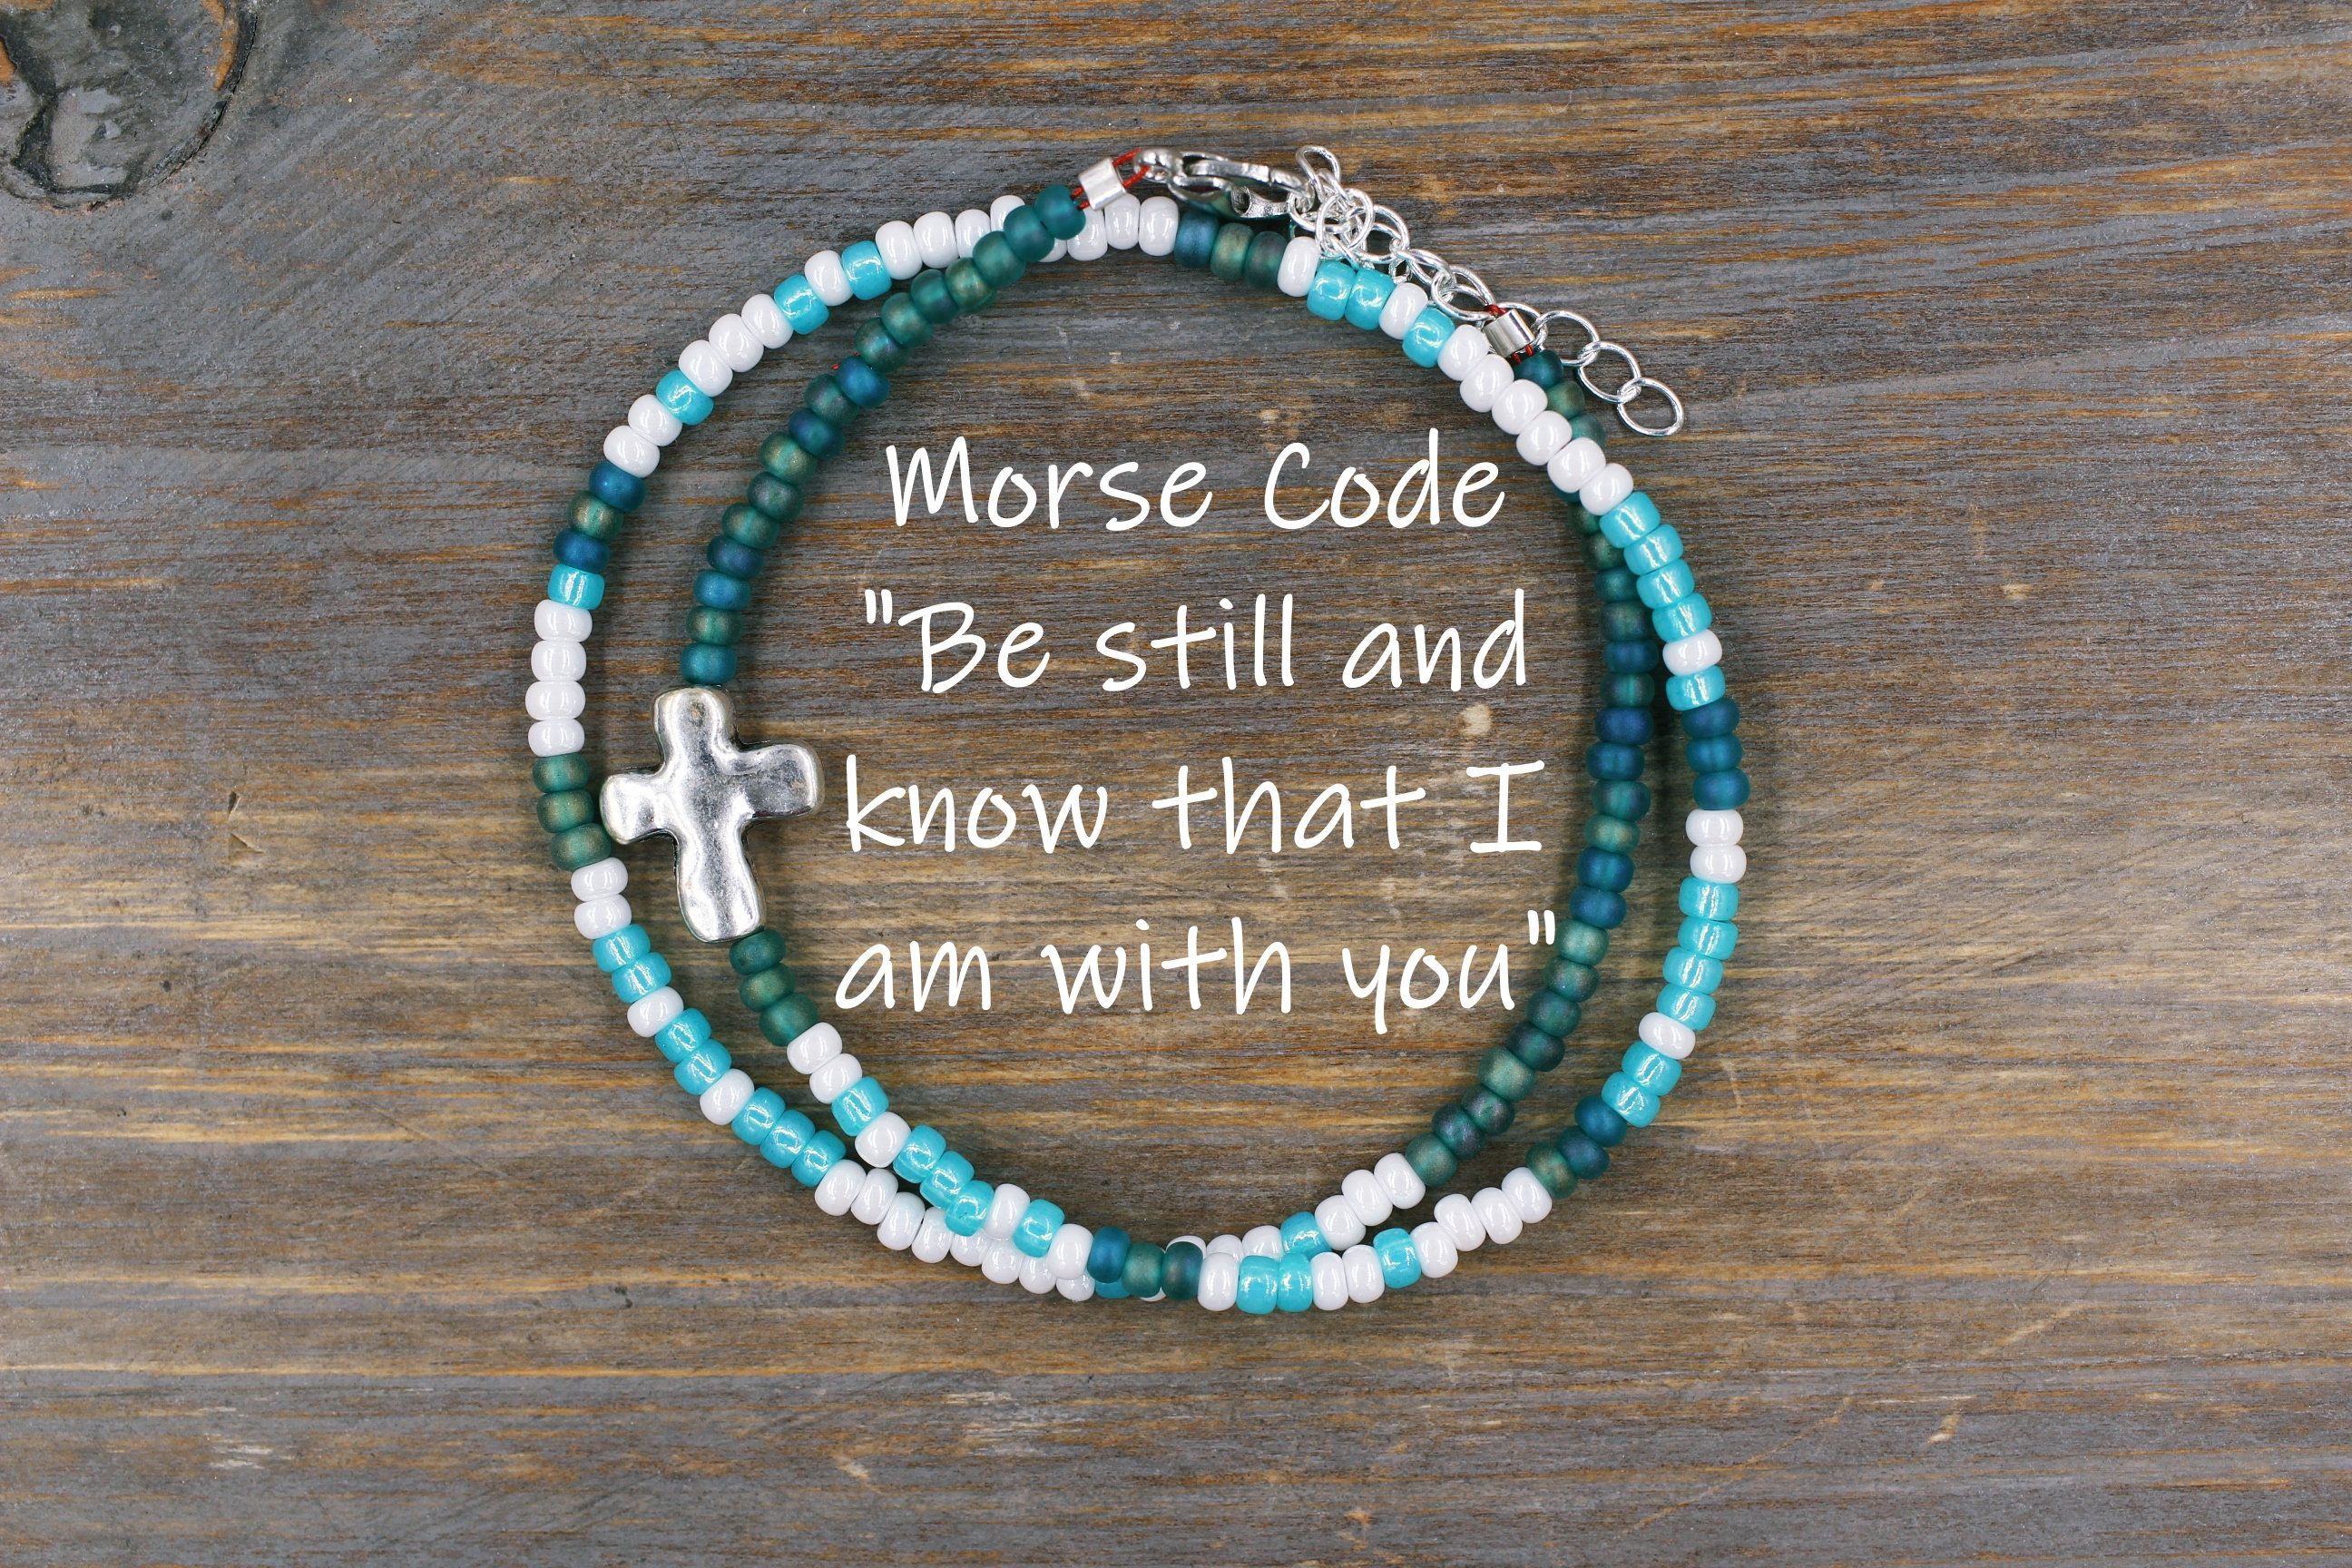 Be still and know that I am with you Morse Code Bracelet Silver Cross Charm Bracelet for Christian Women, Cross Bracelet Be still bracelet - Be still and know that I am with you Morse Code Bracelet Silver Cross Charm Bracelet for Christian Women, Cross Bracelet Be still bracelet -   18 diy Bracelets for women ideas